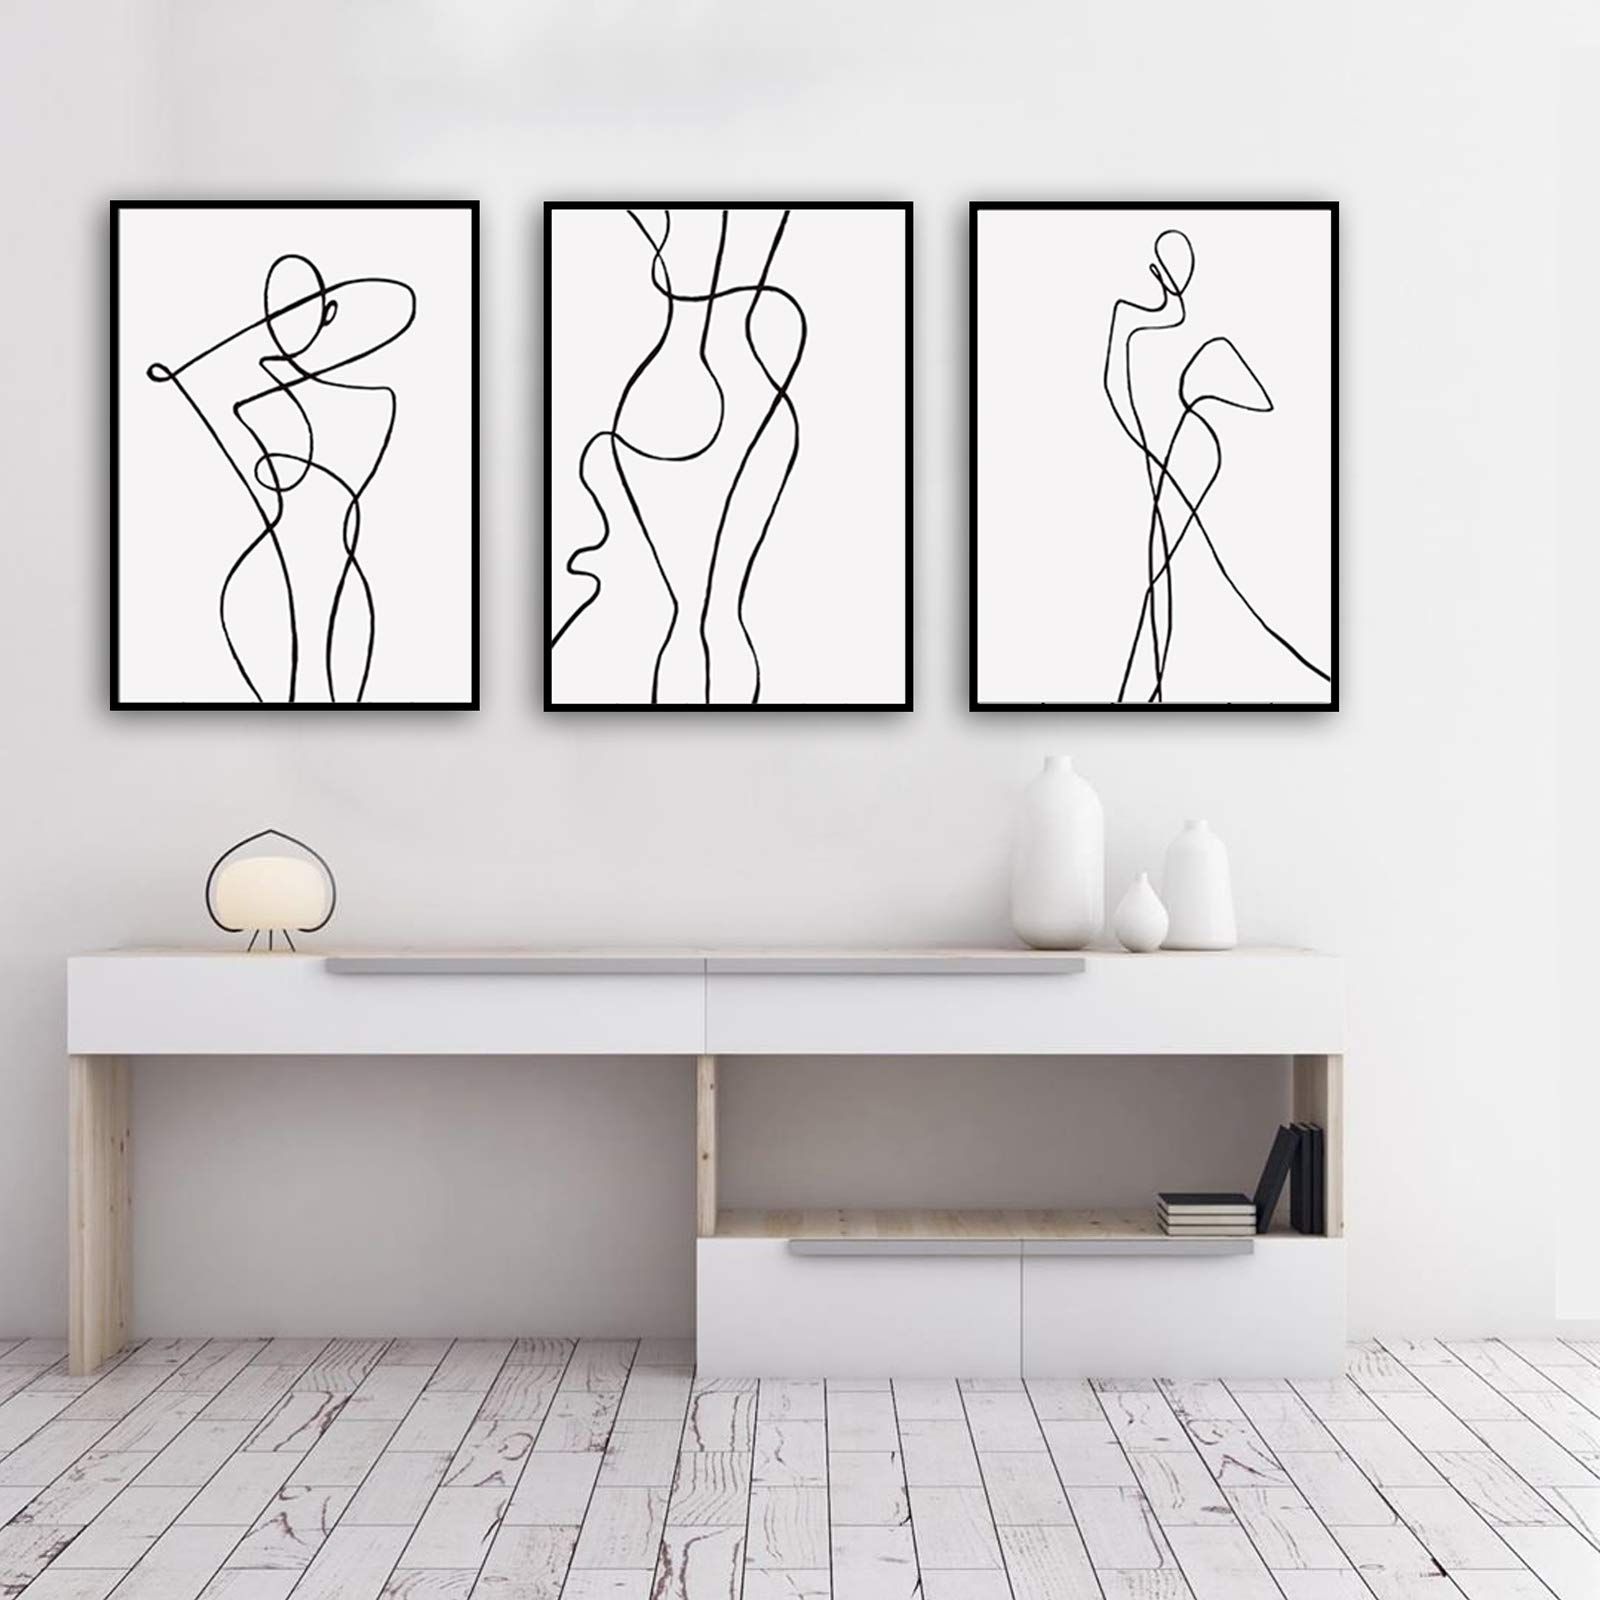 Female Wall Art Regarding Widely Used Amazon: Ecyanlv Female Wall Art Line Drawing Girl Print Minimalist Wall  Art Simple Fashion Poster Women Flower Leaf Body Sketch Black White Canvas  Painting Aesthetic Canvas Prints 16x24inchx3 Unframed: Posters & Prints (View 3 of 15)